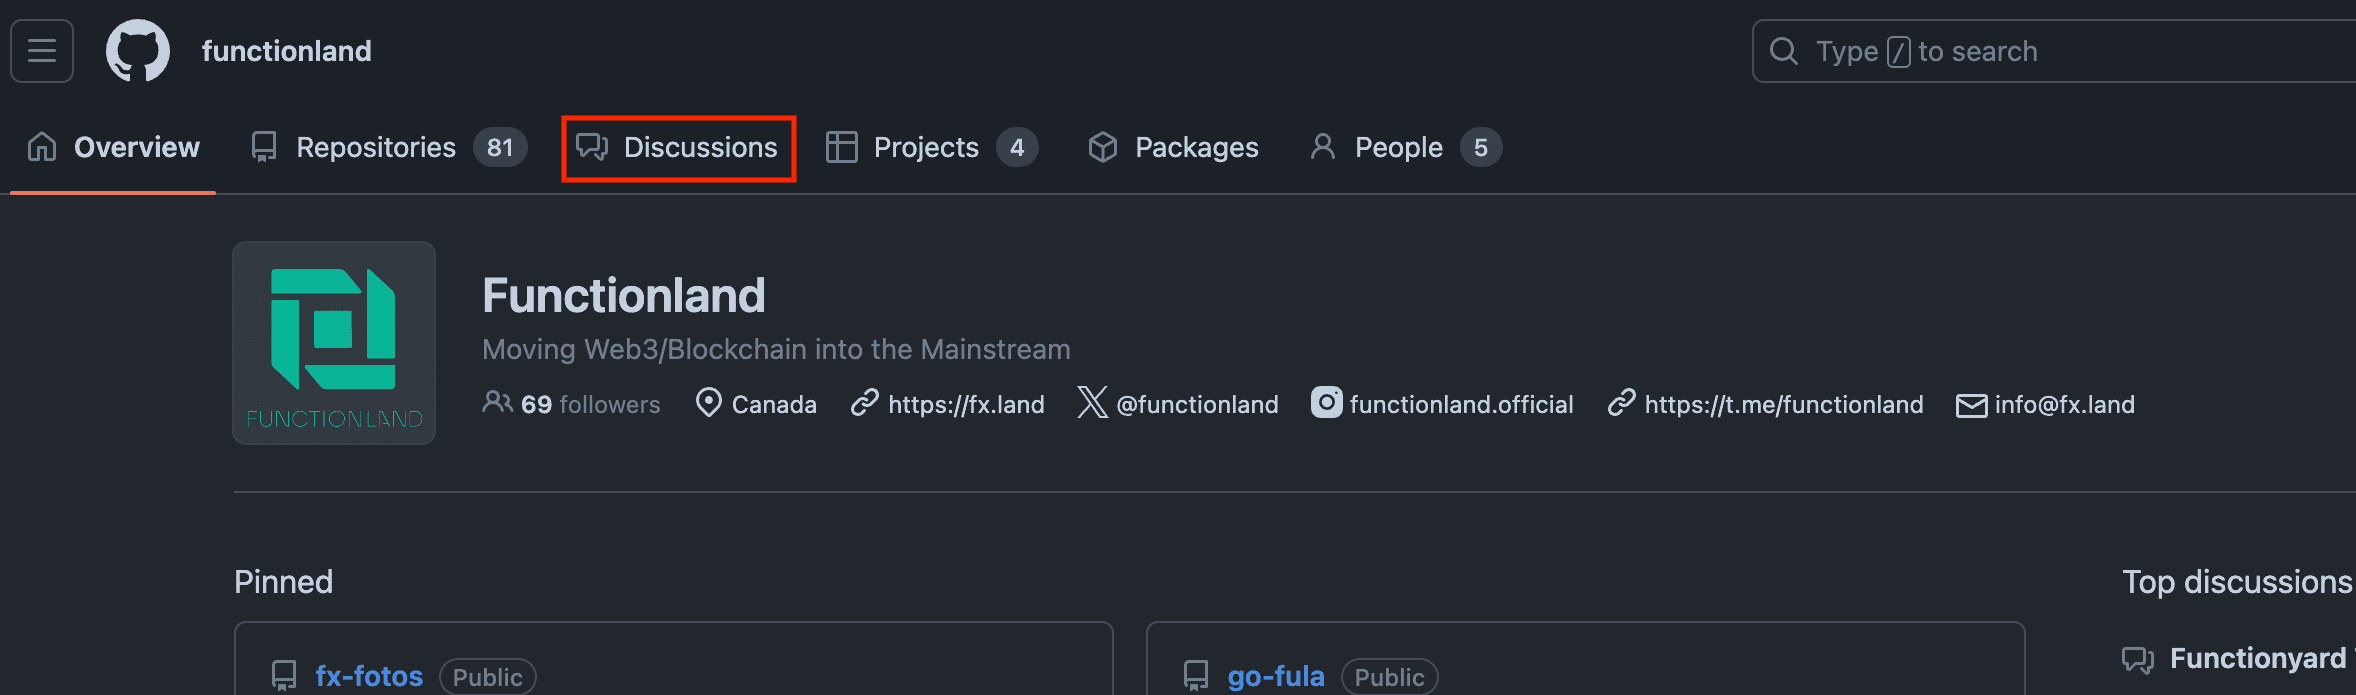 discussions tab on github